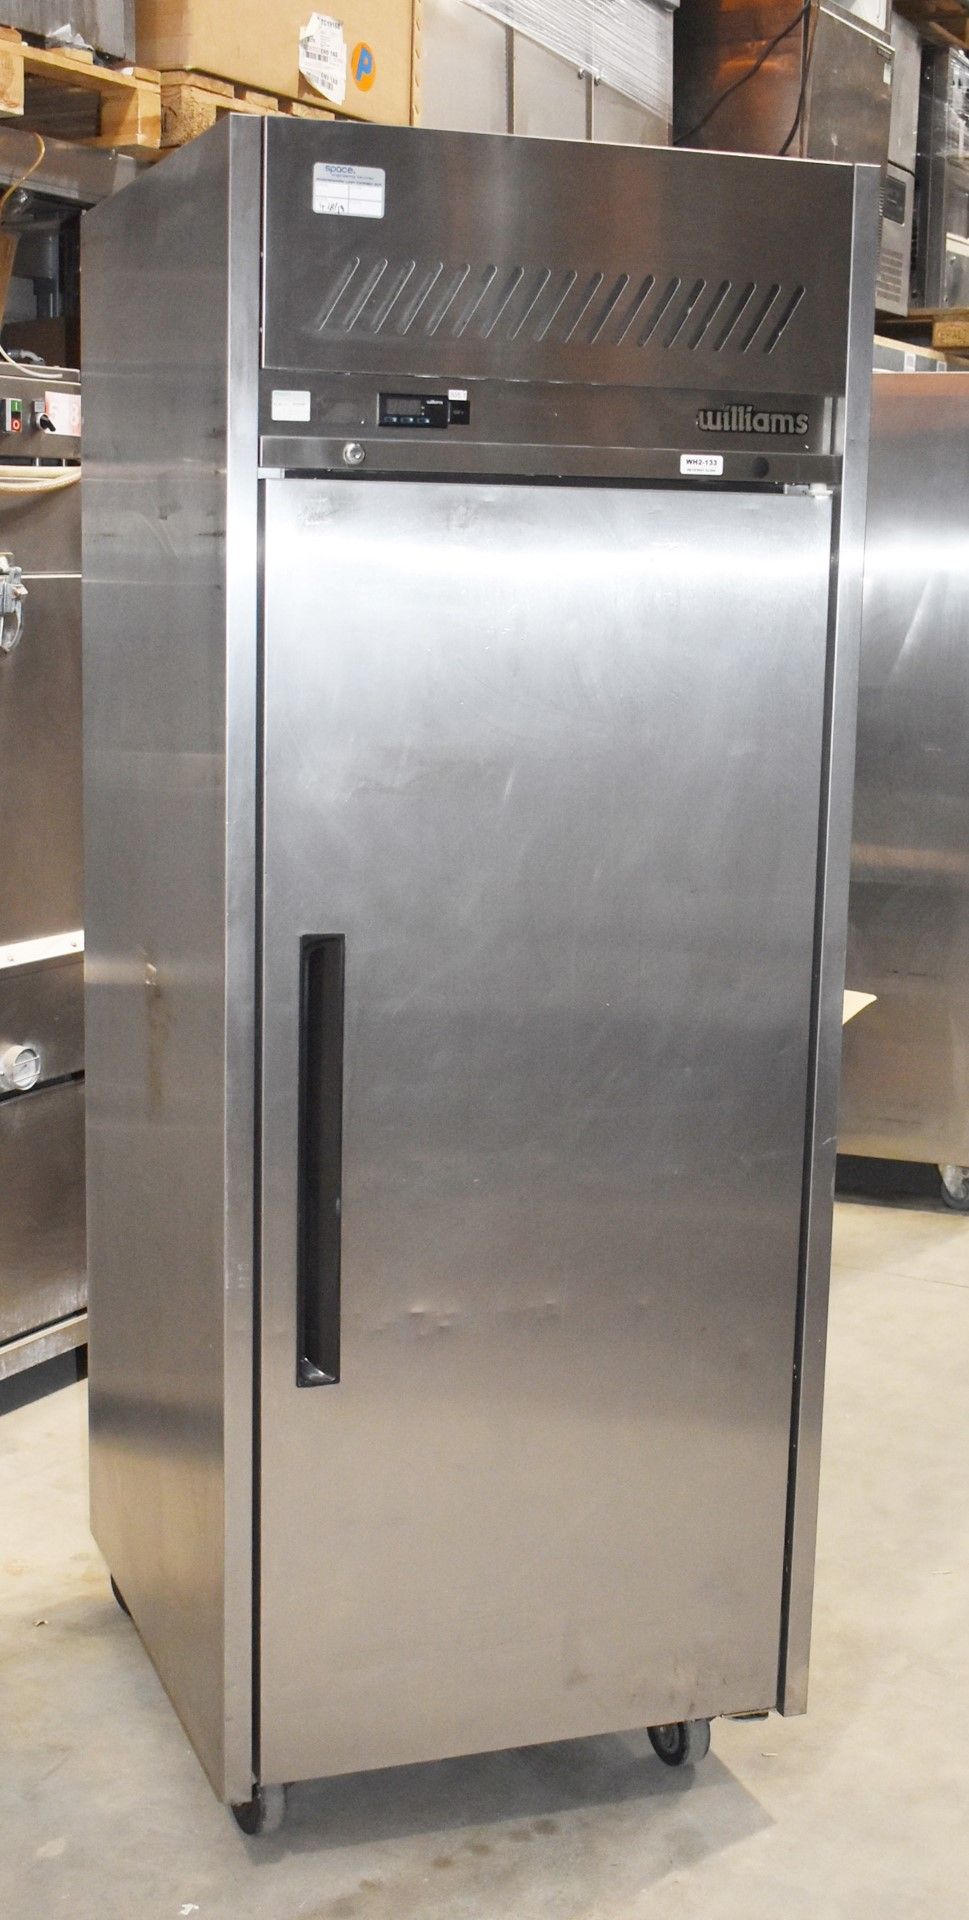 1 x Williams Upright Single Door Refrigerator With Stainless Steel Exterior - Model HJ1SA - Recently